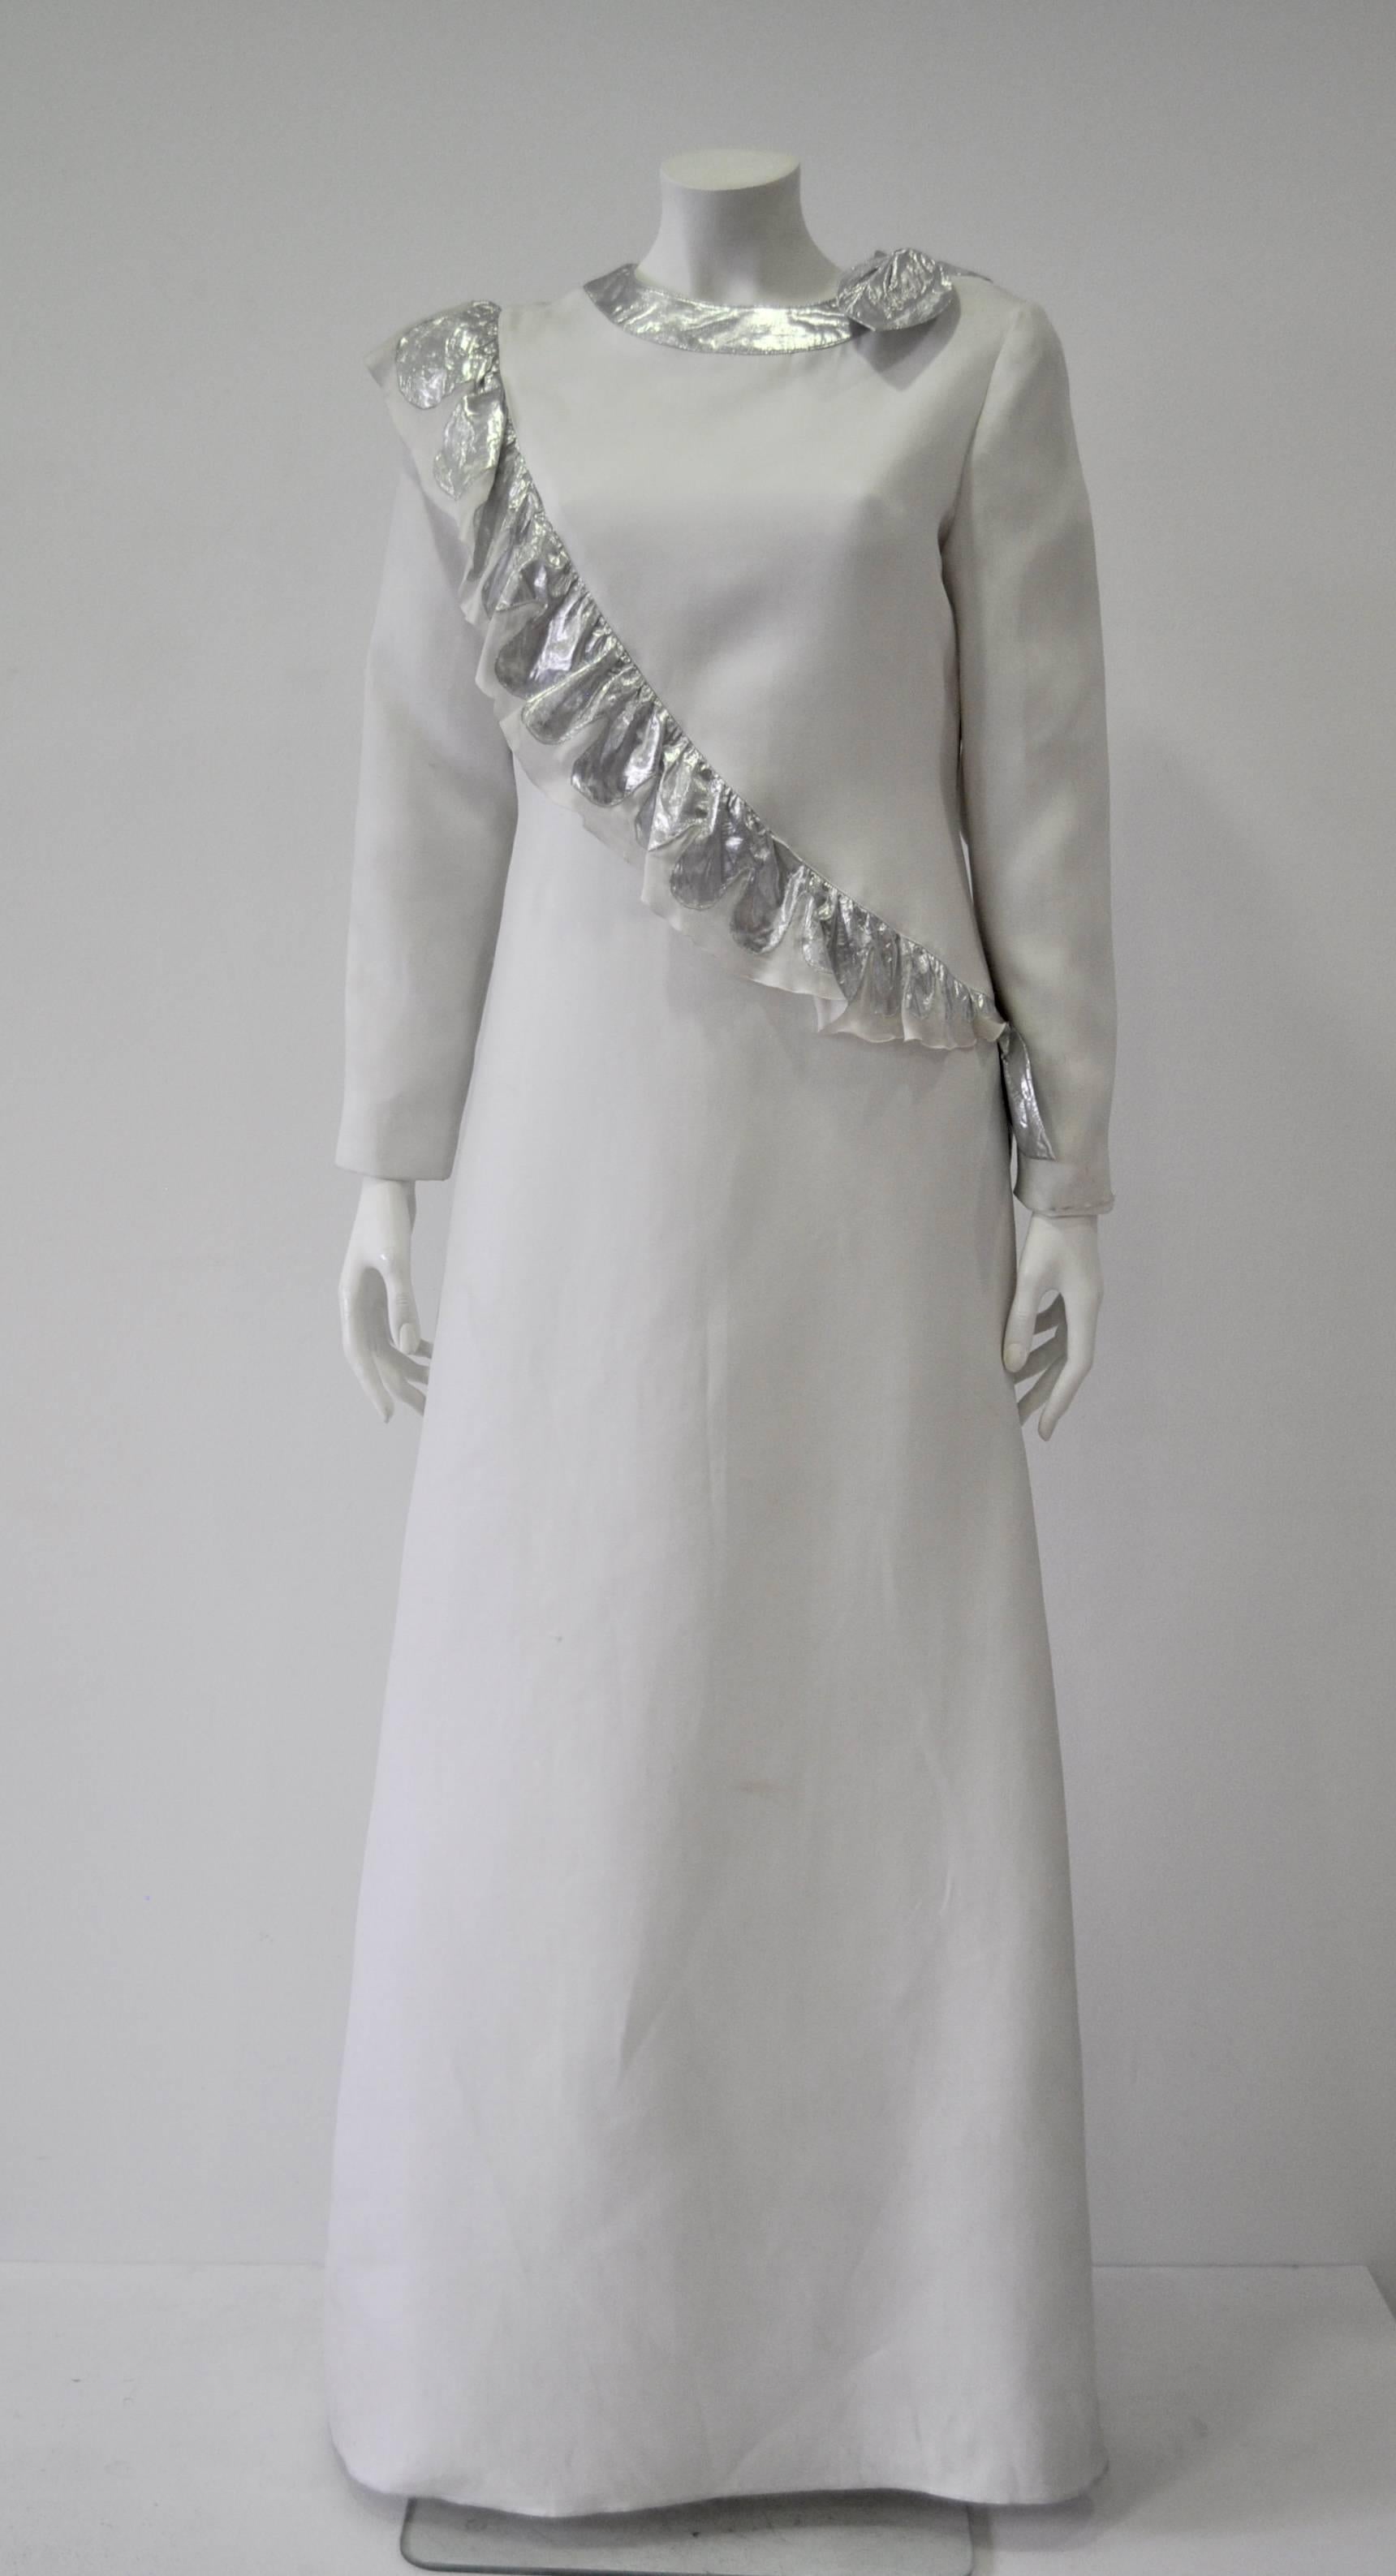 Museum Quality Courreges Metallic Ruffle Sash Evening Gown 1970's